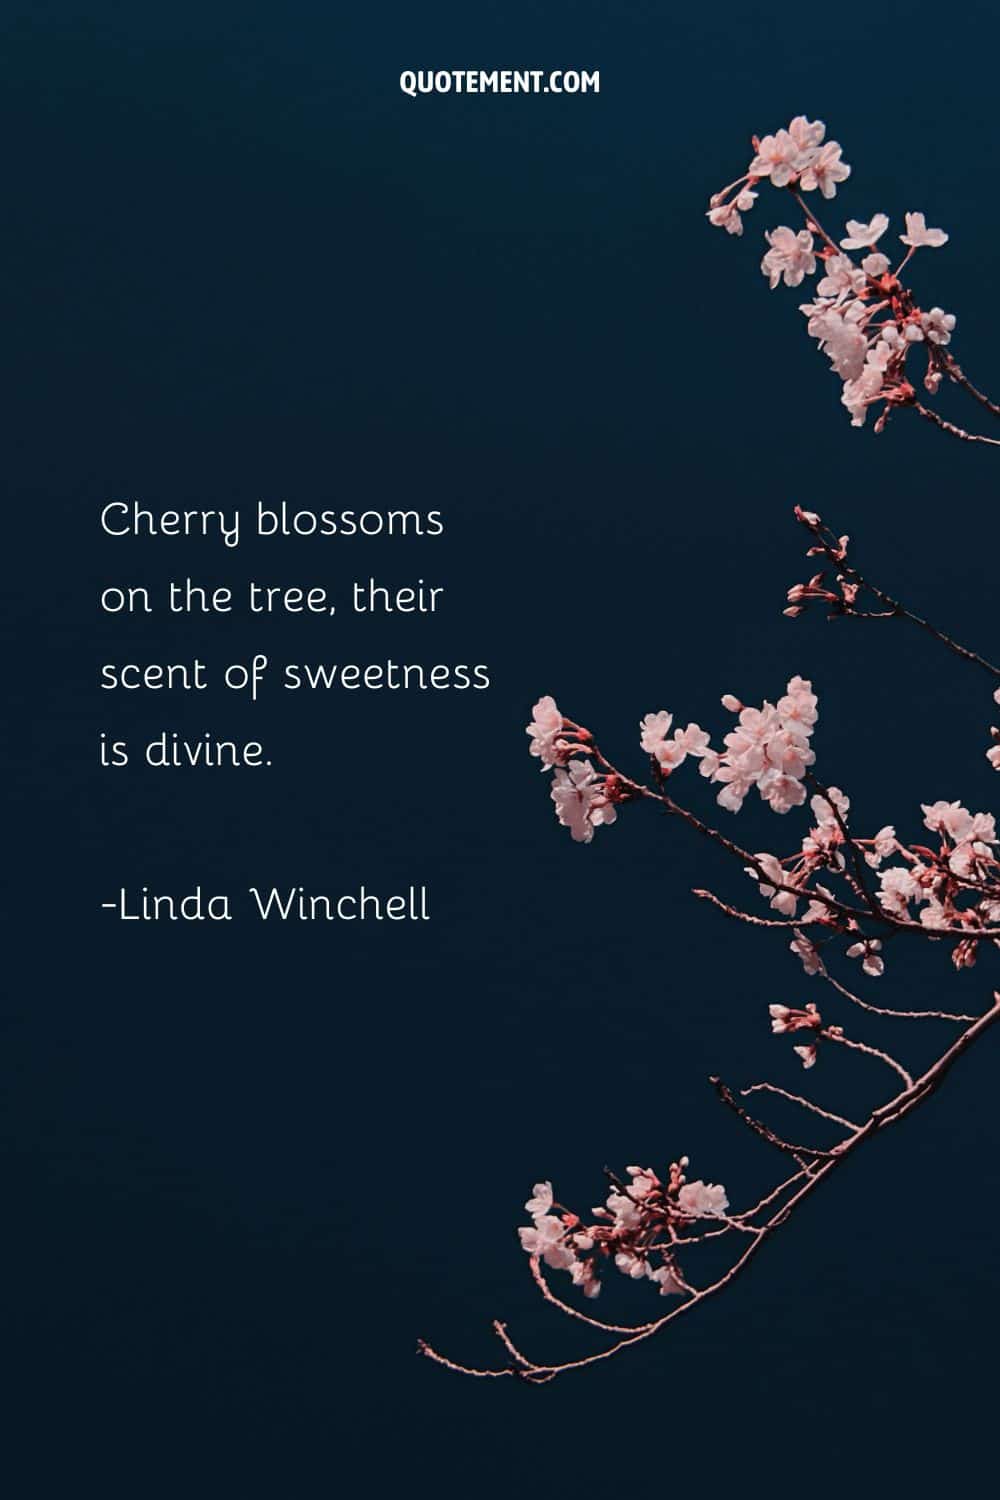 Inspirational bloom quote and cherry blossom branches.